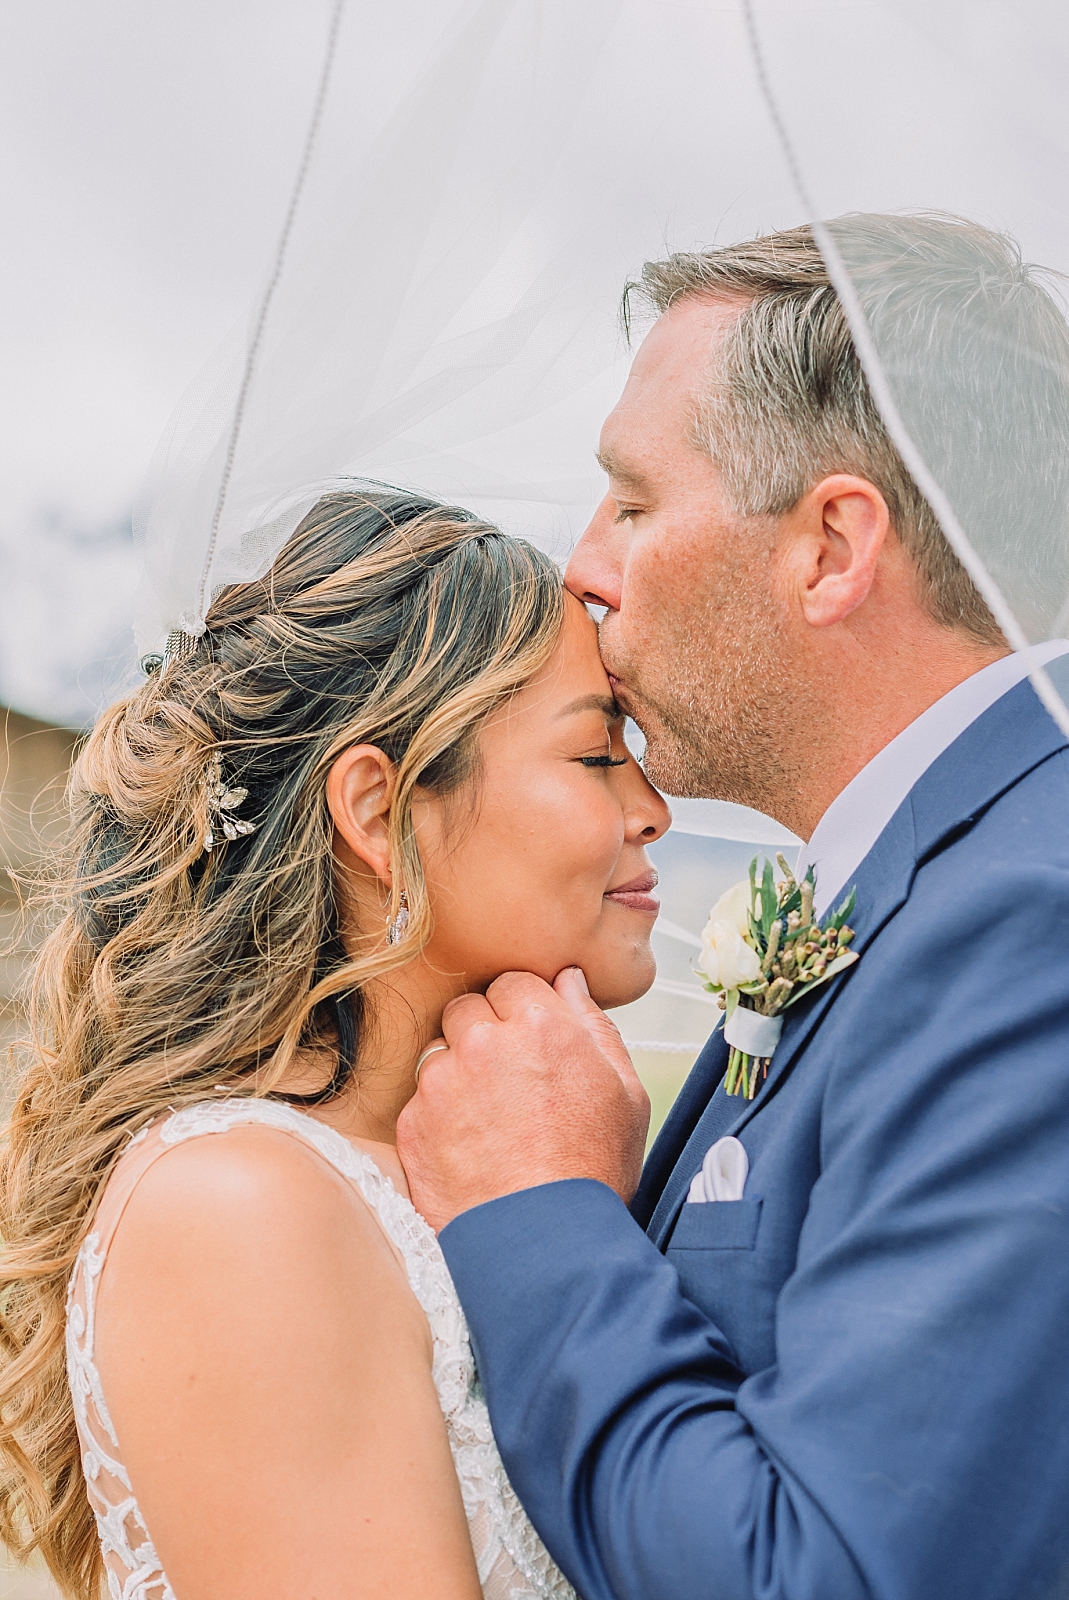 jackson hole wedding photographer, posing ideas for couples, traditional and timeless wedding photography